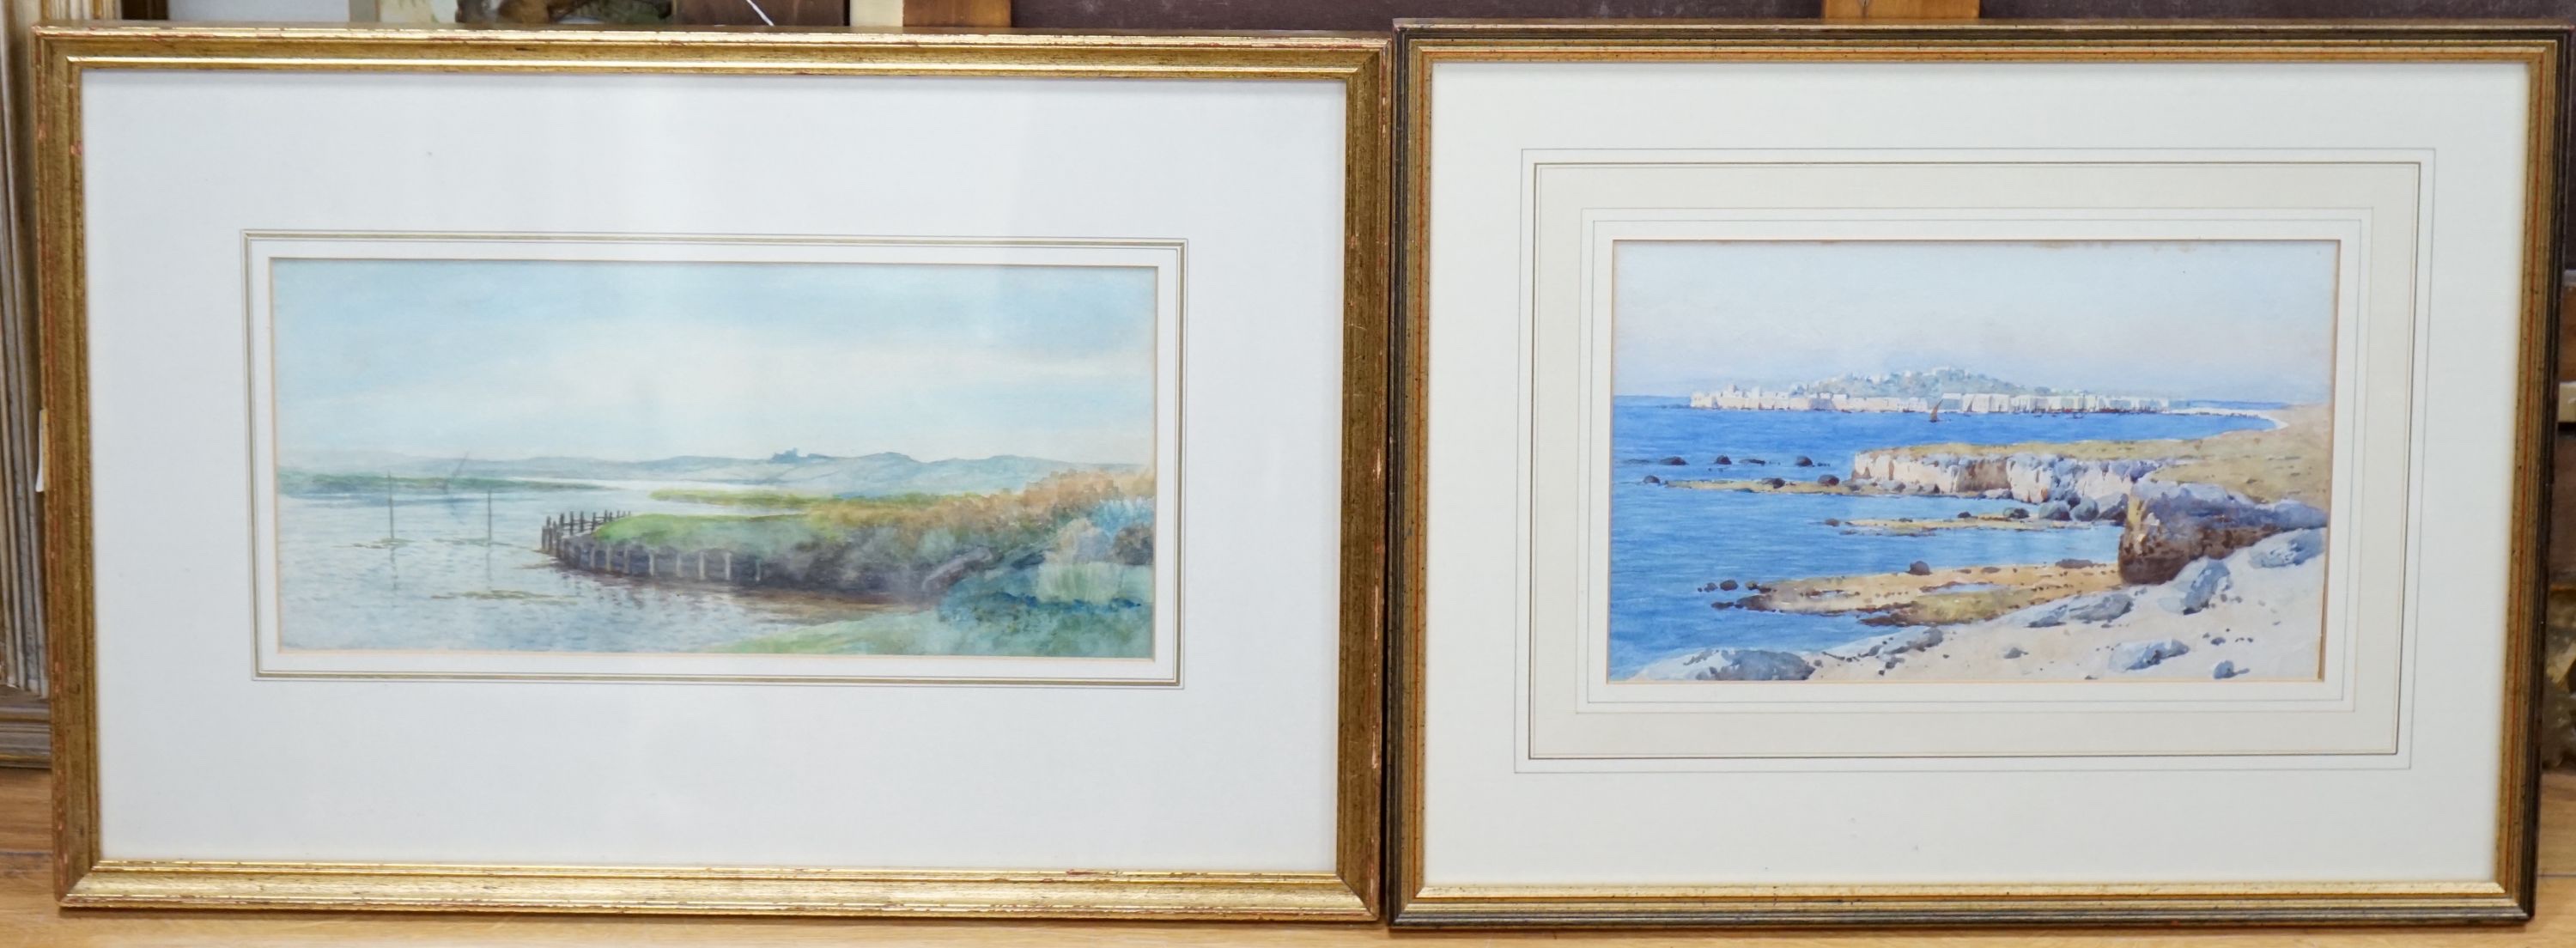 Charles Saunders, watercolour, 'Creek', label verso, 15 x 34cm and another watercolour of a Mediterranean coastal scene, 17 x 28cm